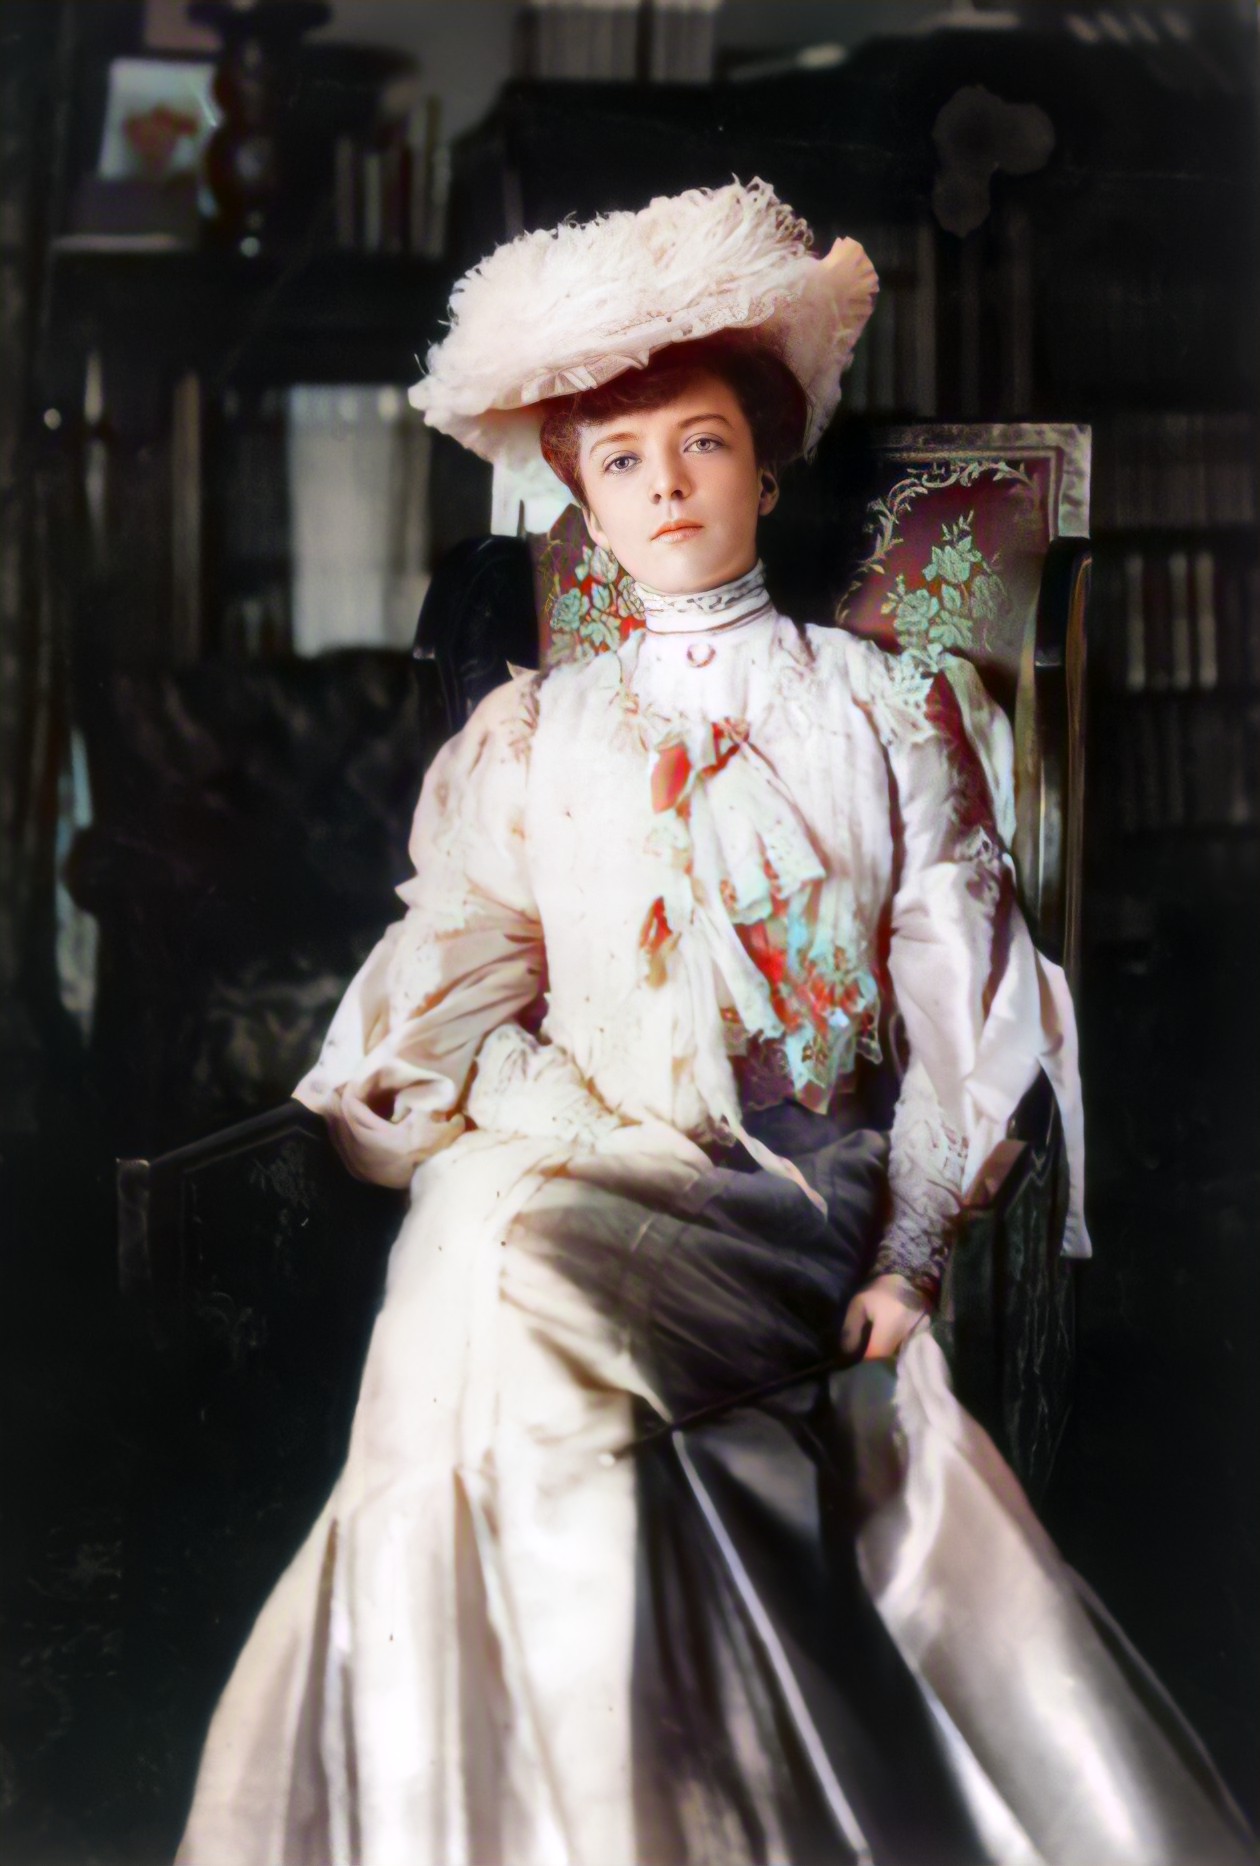 Miss Alice Lee Roosevelt by LordSopping1884 on DeviantArt